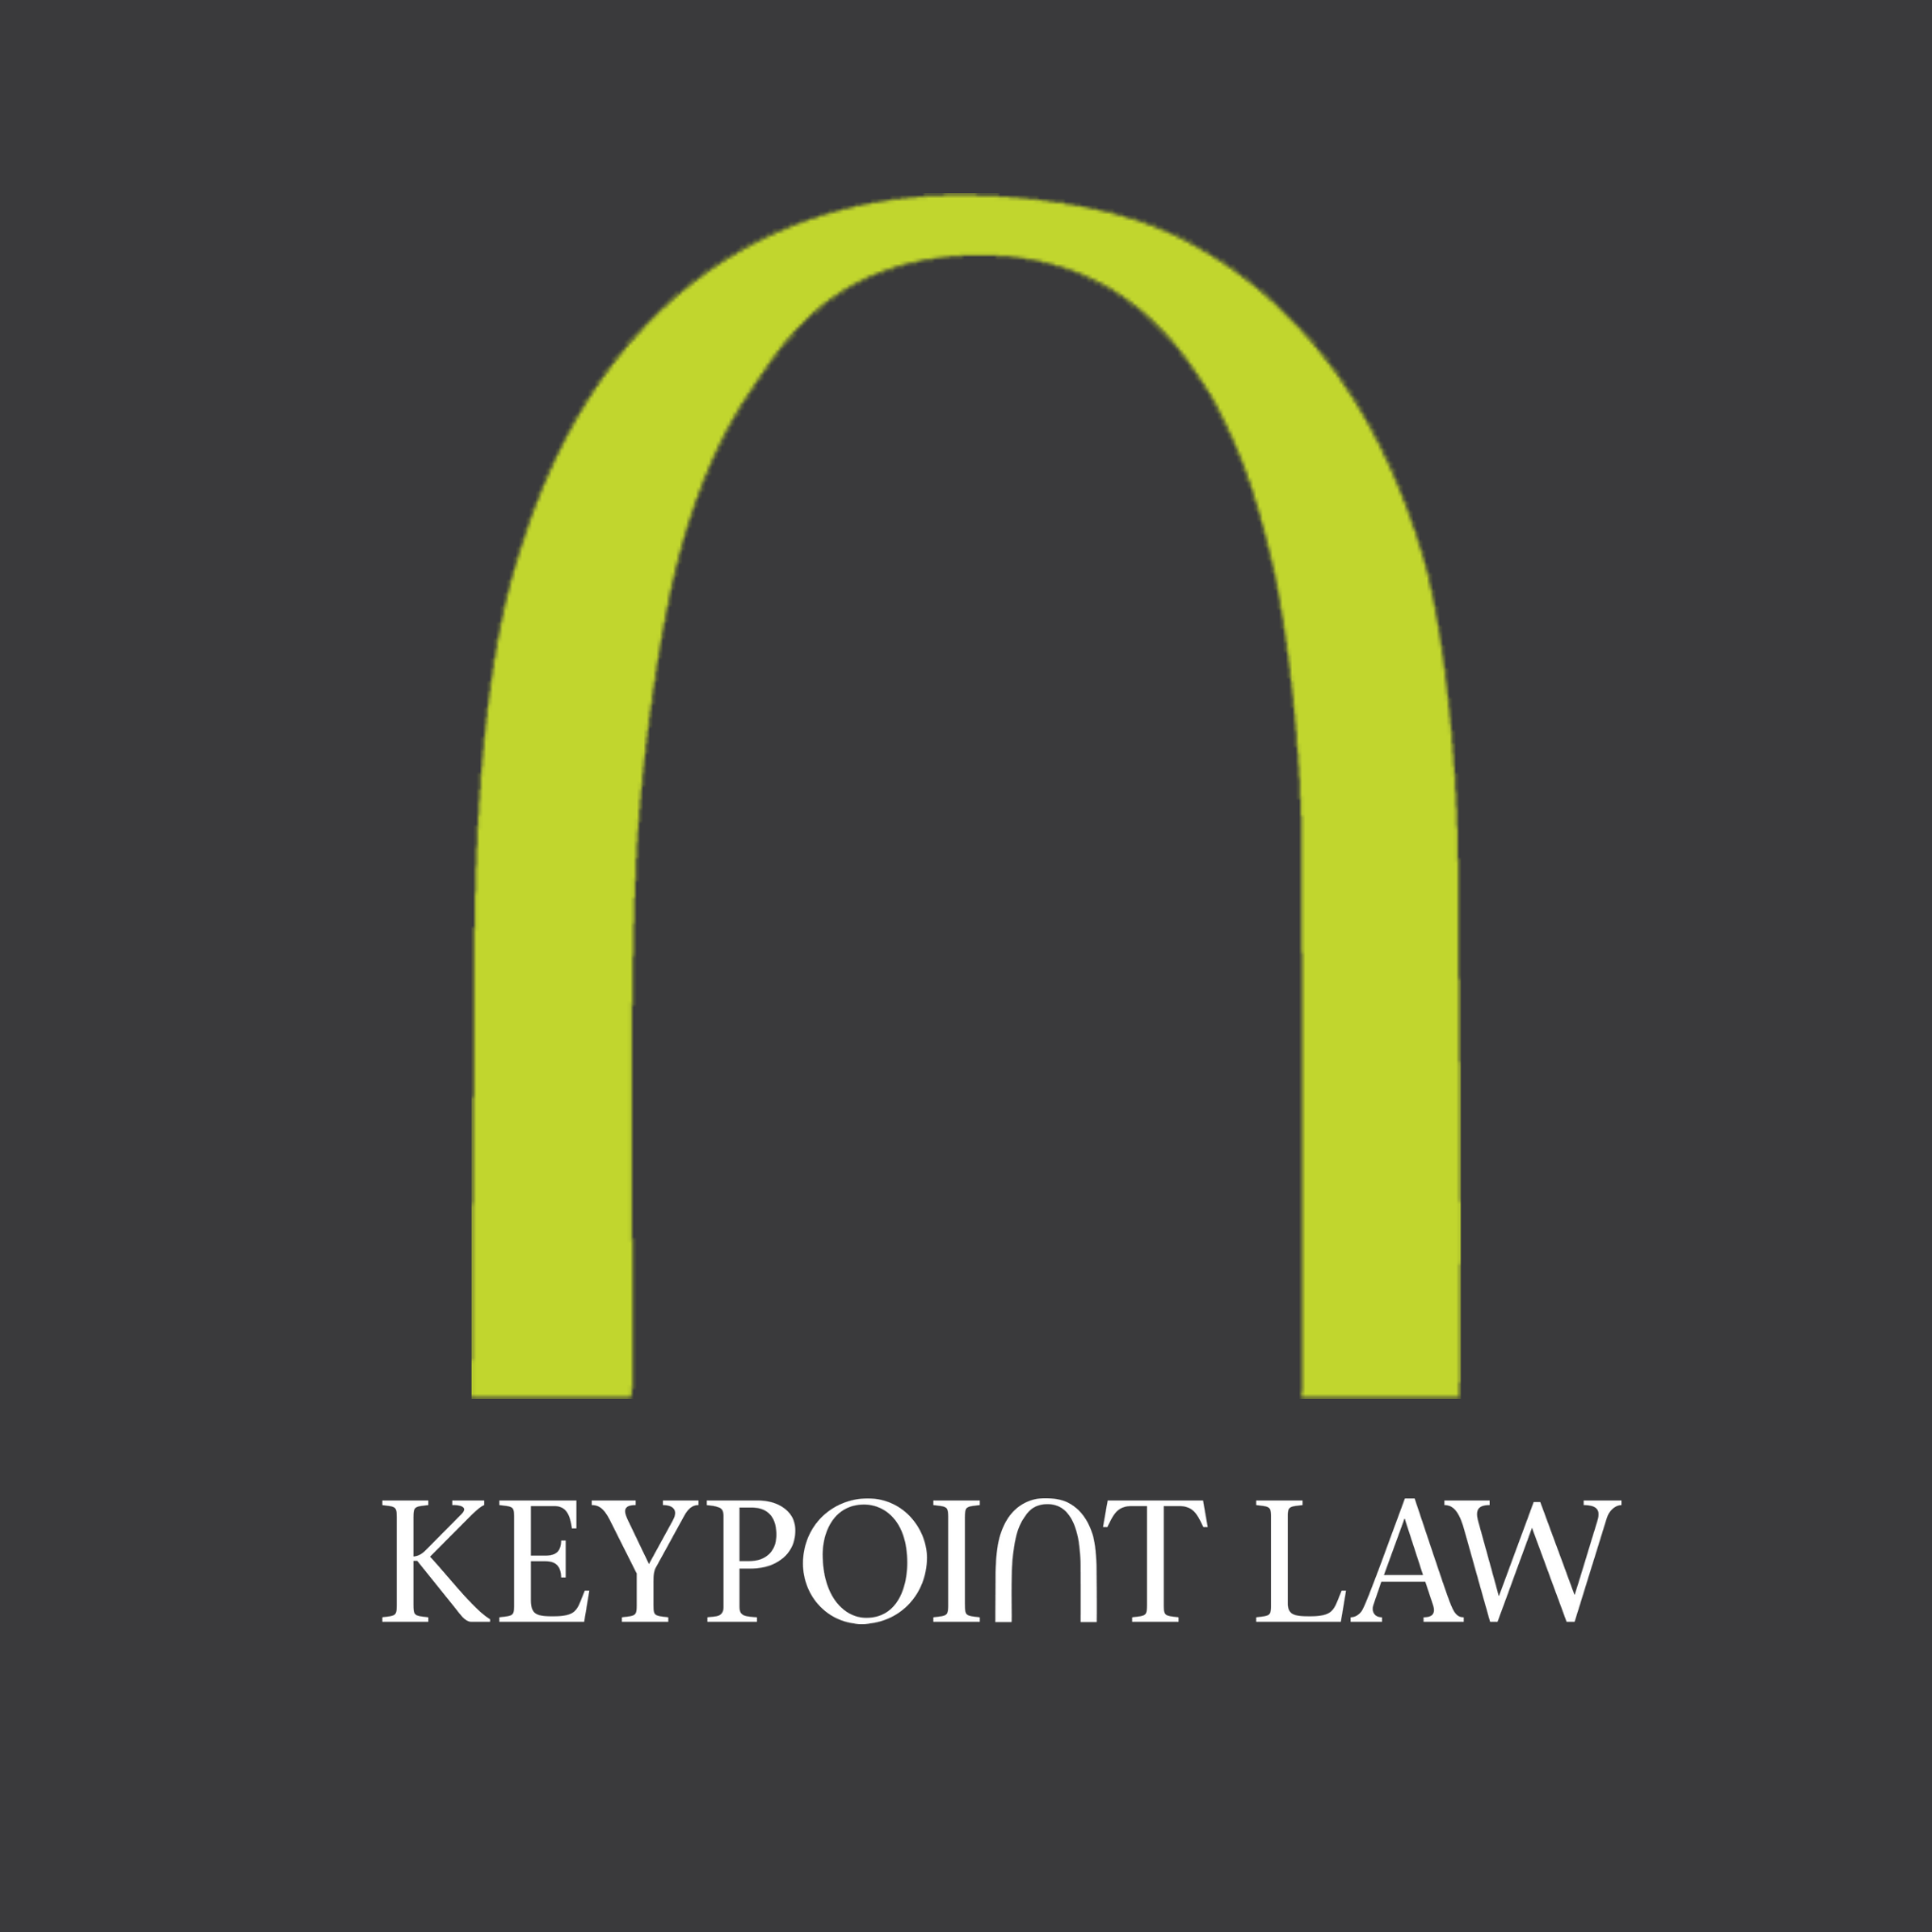 Company logo of Keypoint Law - Melbourne